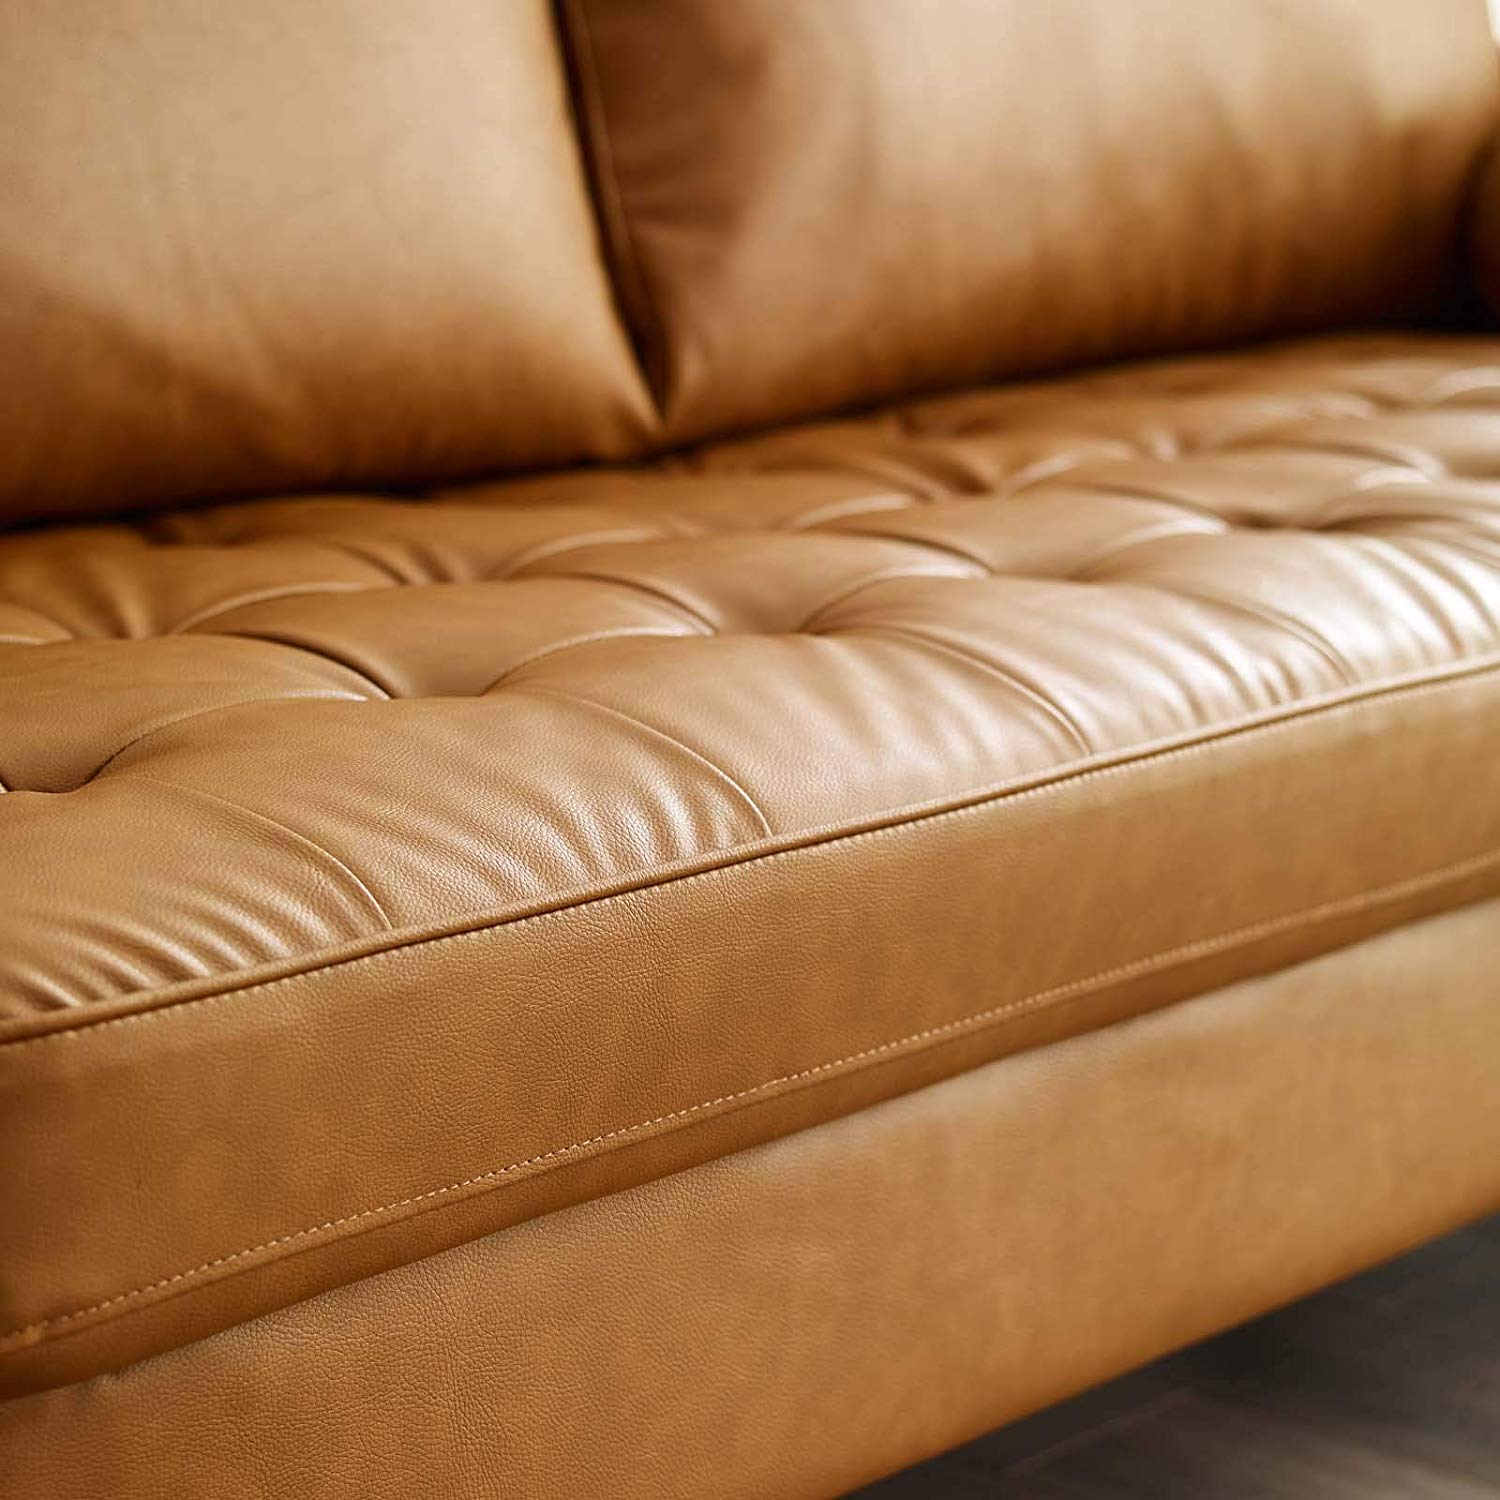 Valiant Upholstered Faux Leather Sofa - living-essentials